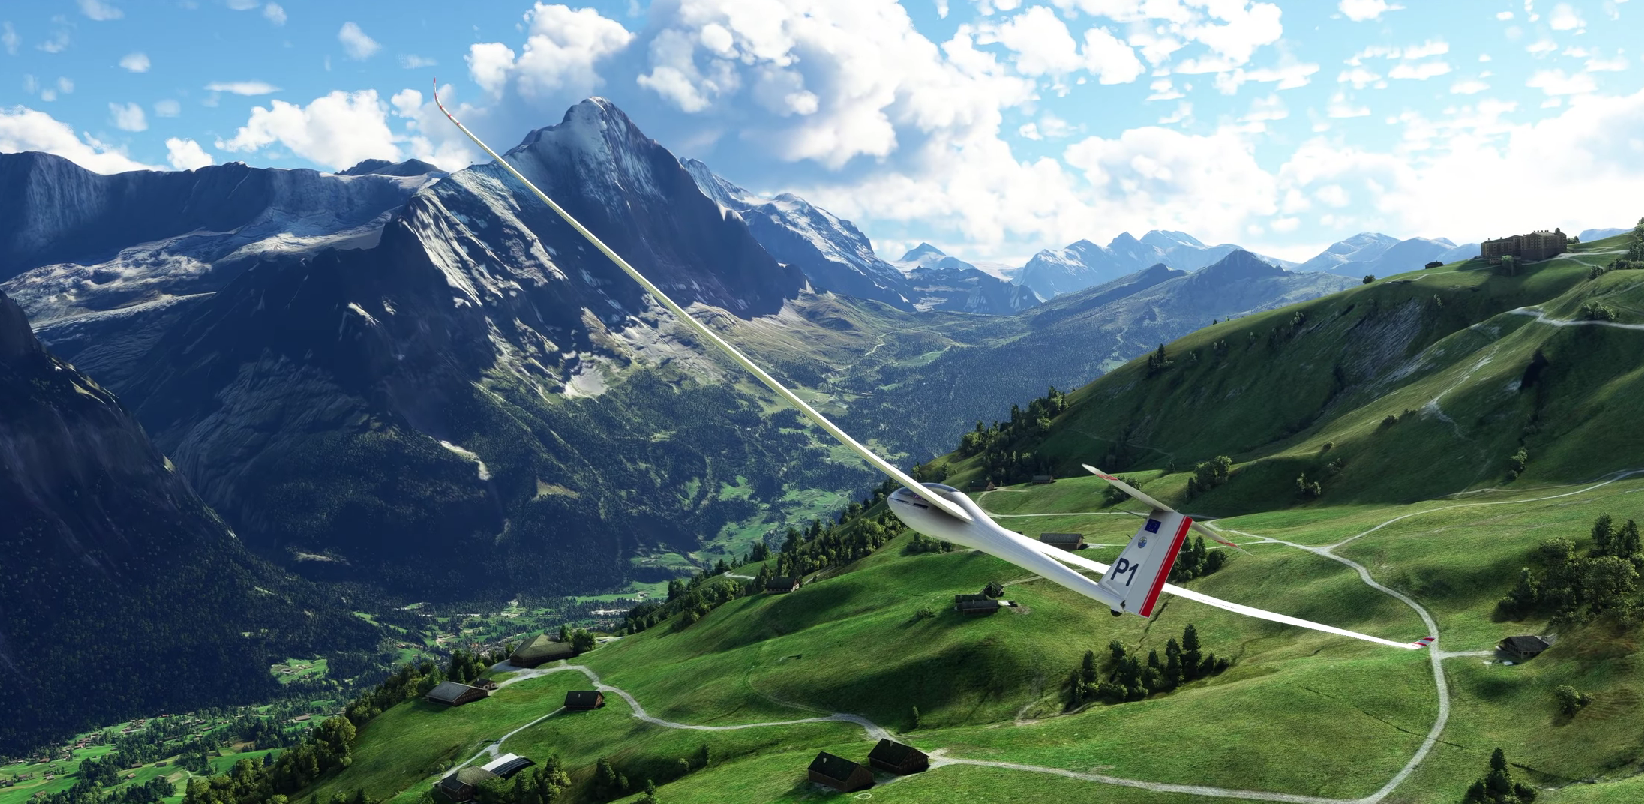 Helicopters and gliders are coming to ”Microsoft Flight Simulator’ on November 11th